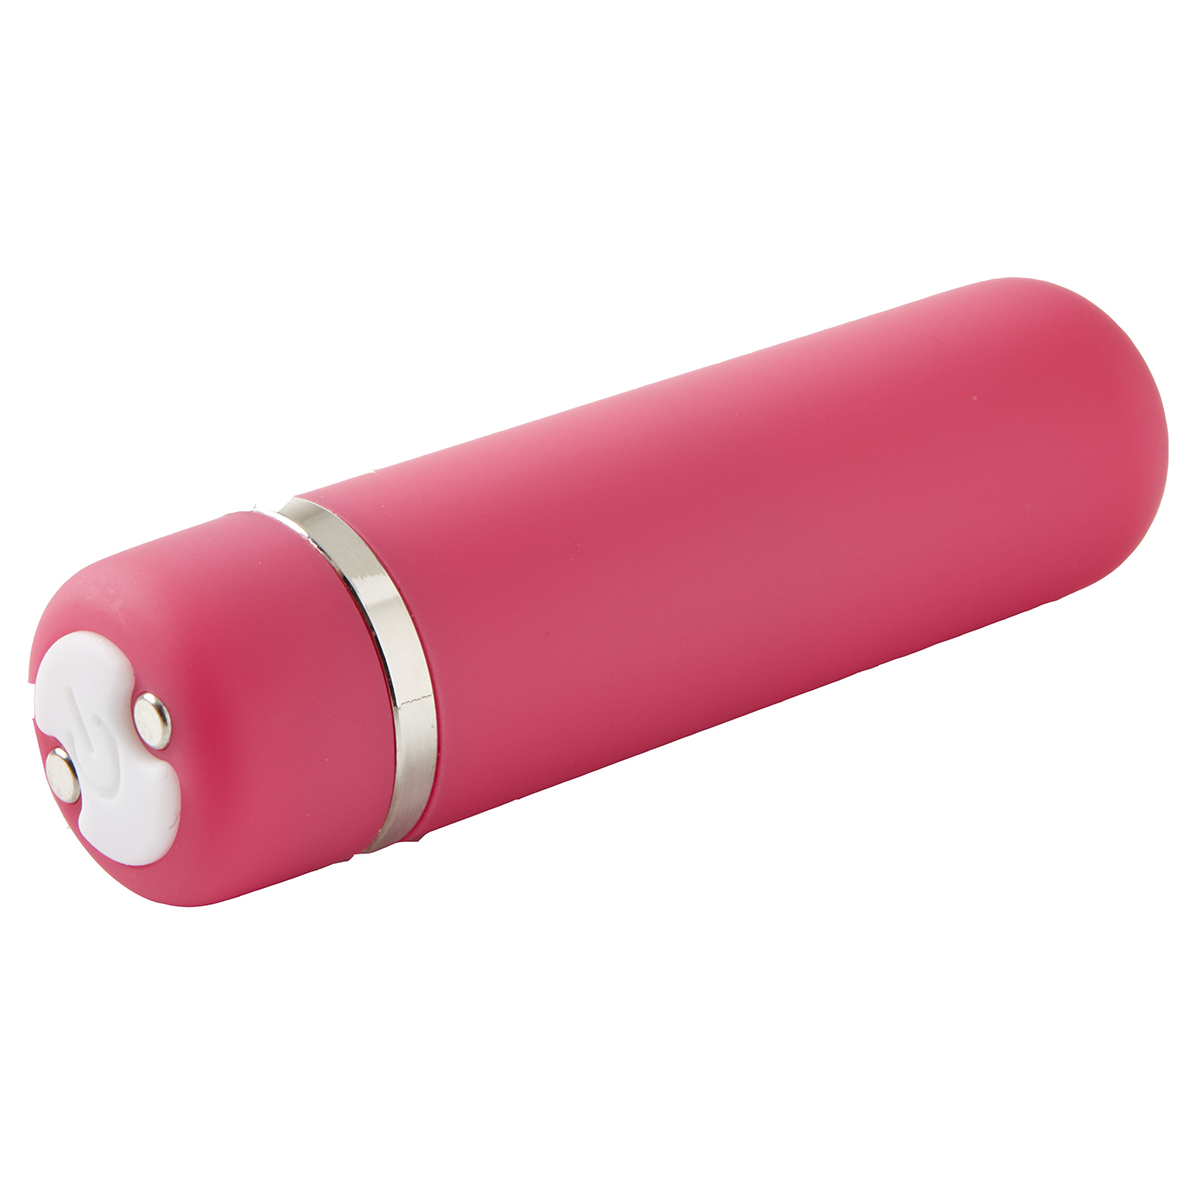 A small but deceptively powerful bullet vibrator, this sleek and quiet beauty is discreet and easy to use.